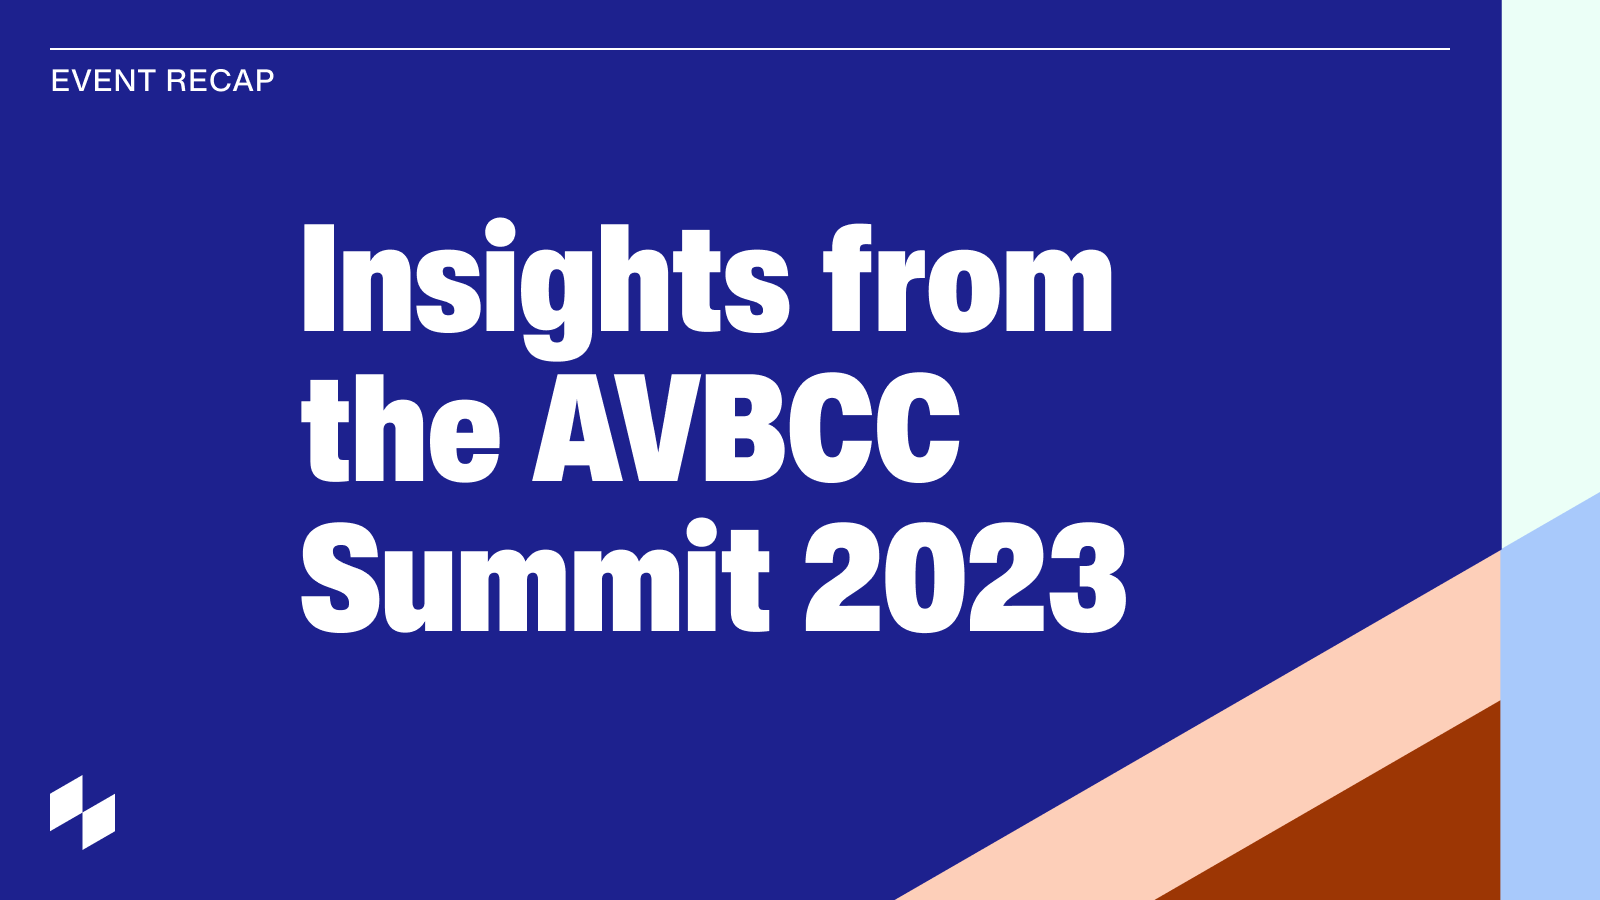 Practice transformation through value-based analytics: Insights from the AVBCC Summit